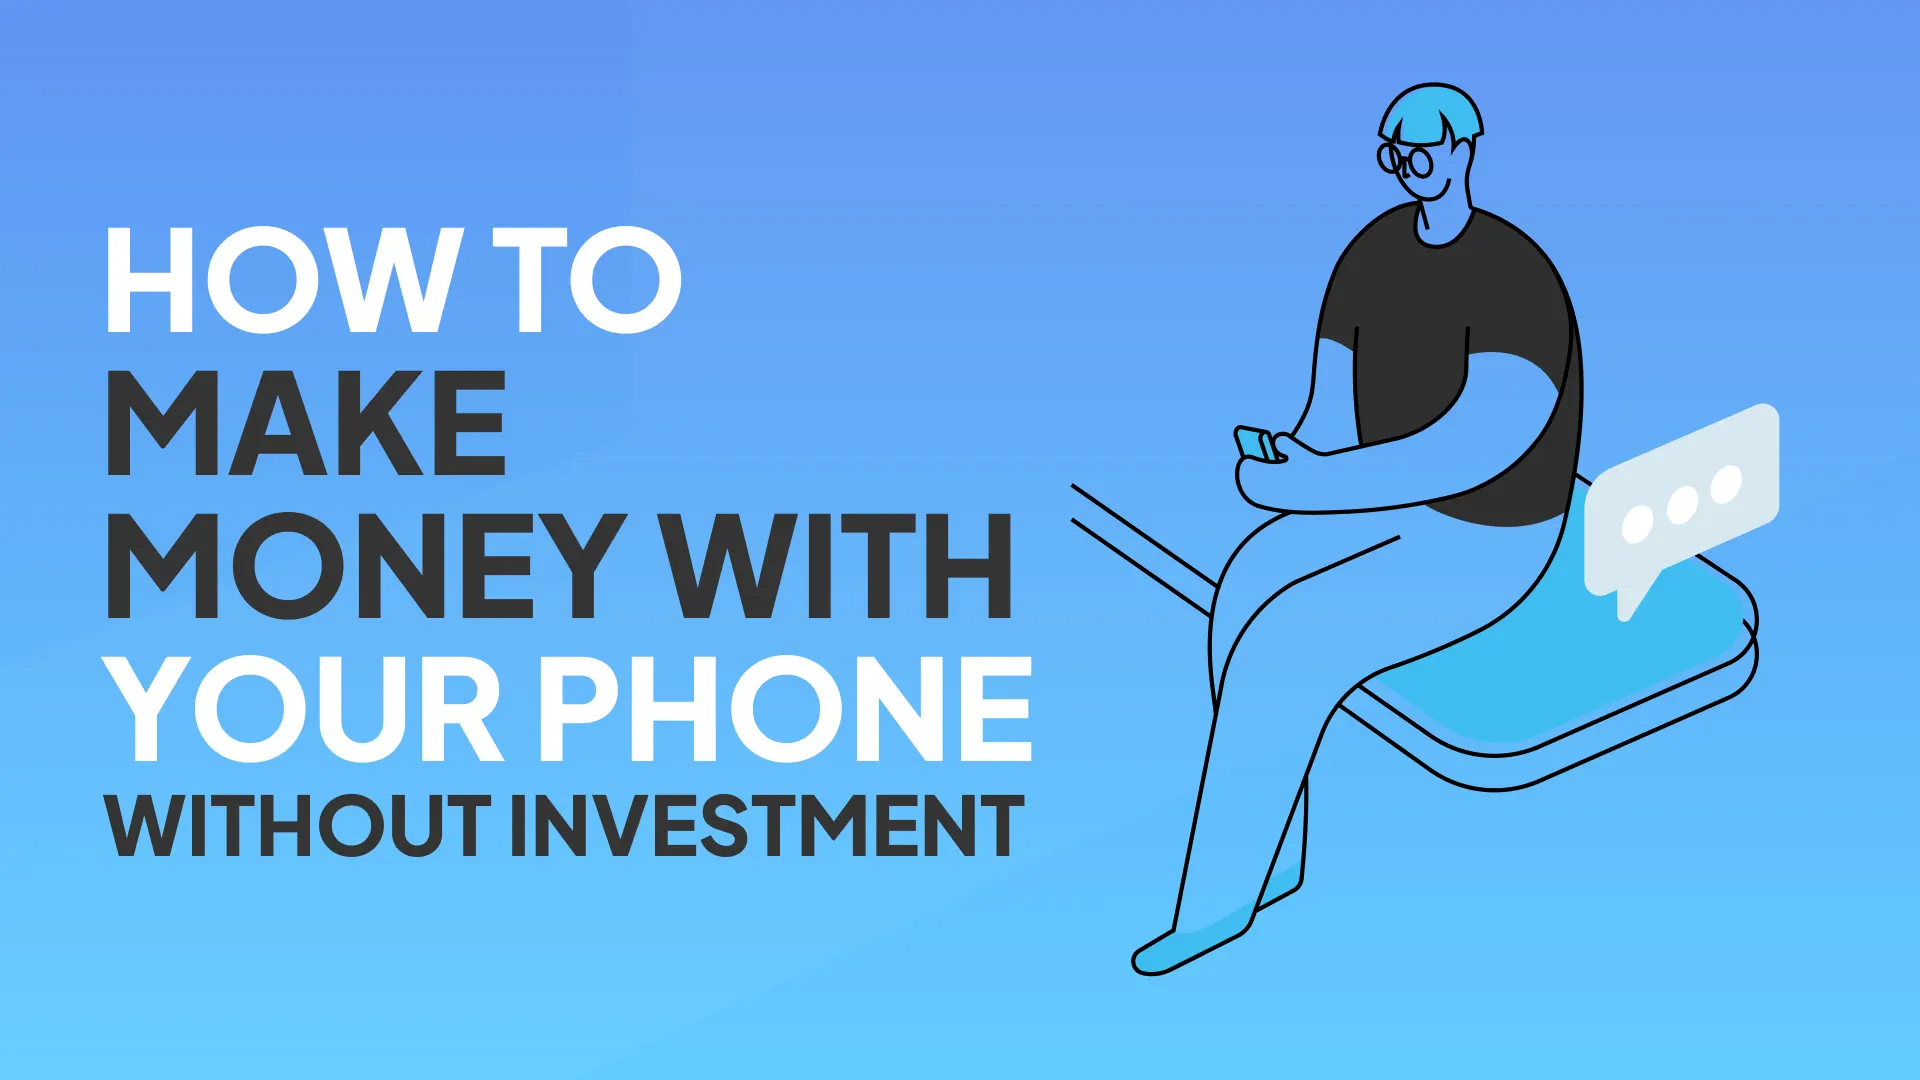 BLOG-FEATUREDIMAGE/how-to-make-money-with-my-phone-without-investment.webp